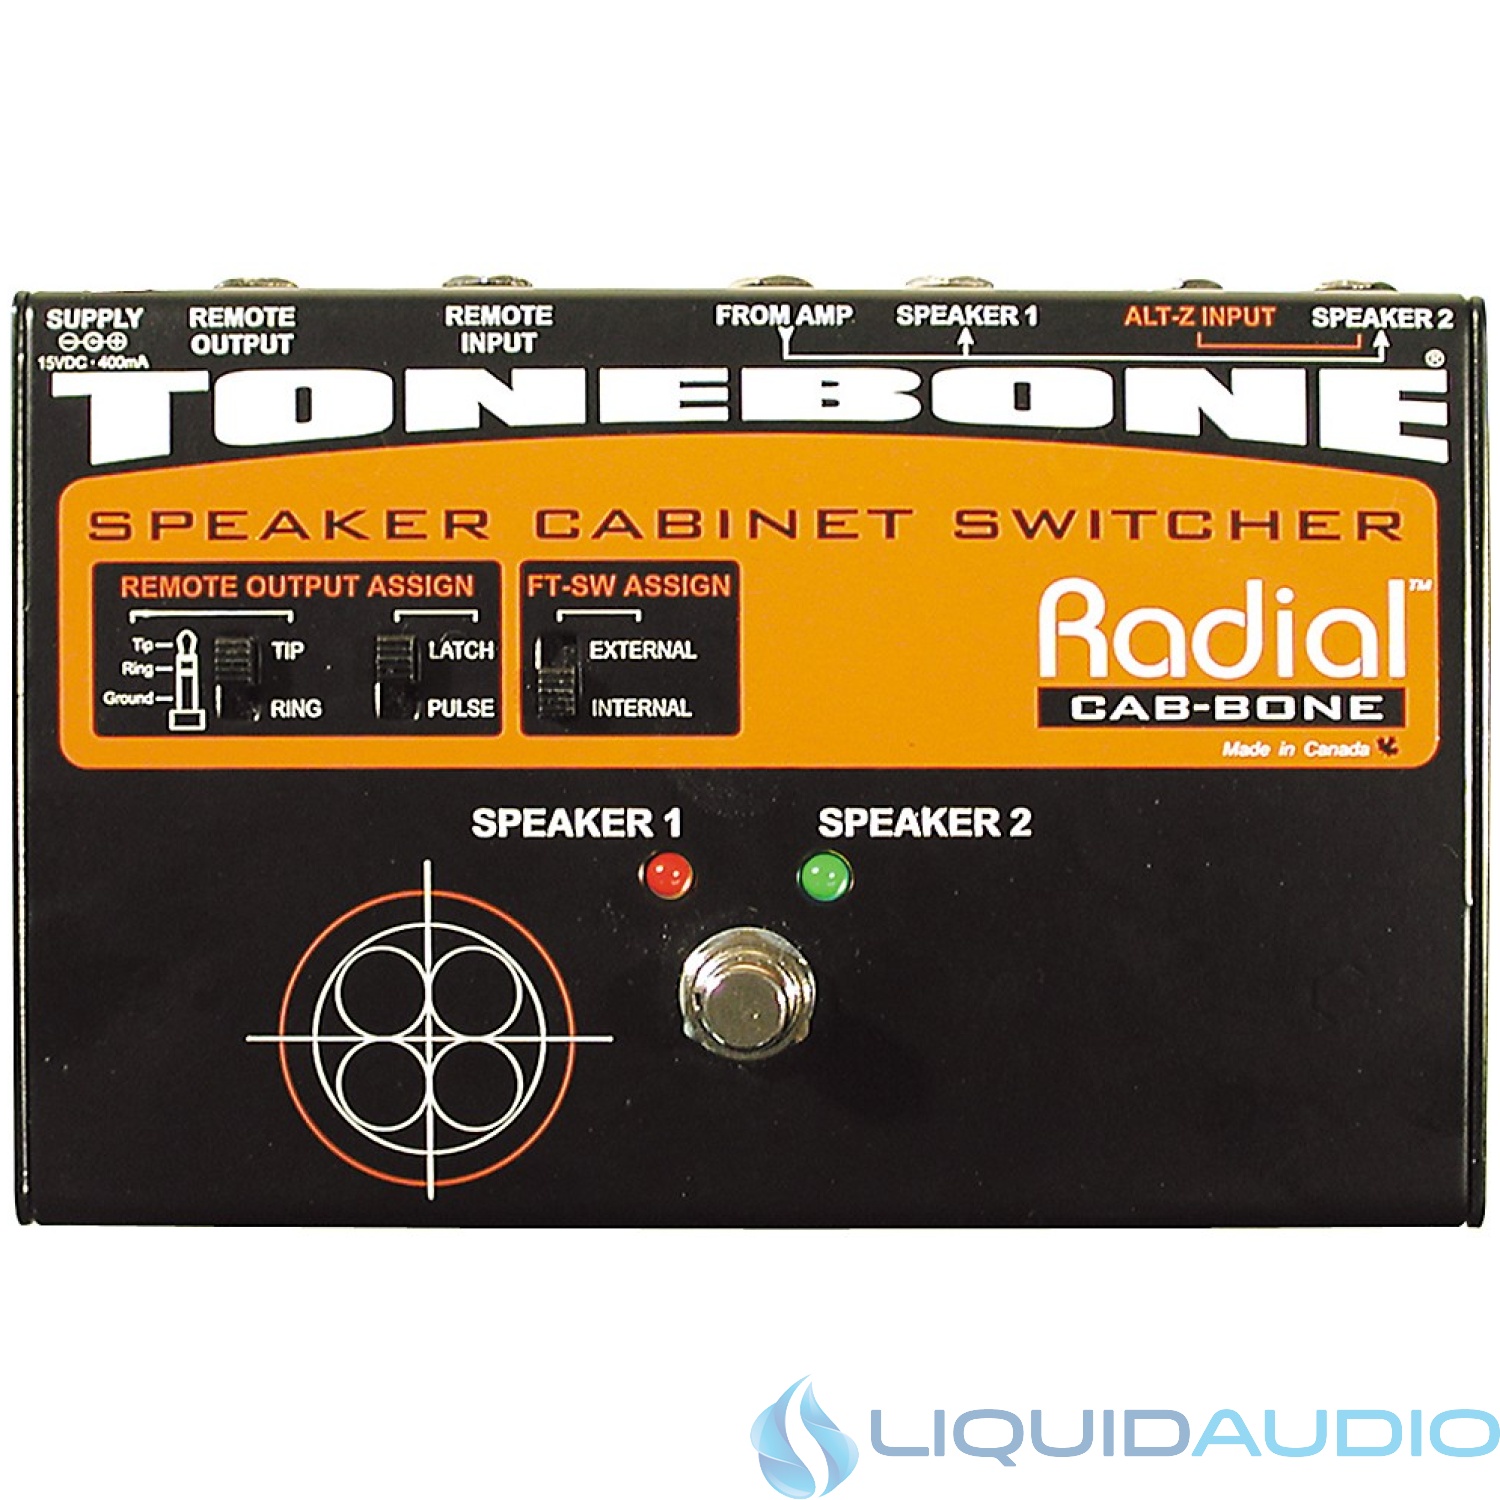 Radial Engineering Cab-Bone Speaker Cabinet Switcher NEW! Free 2-Day Delivery!